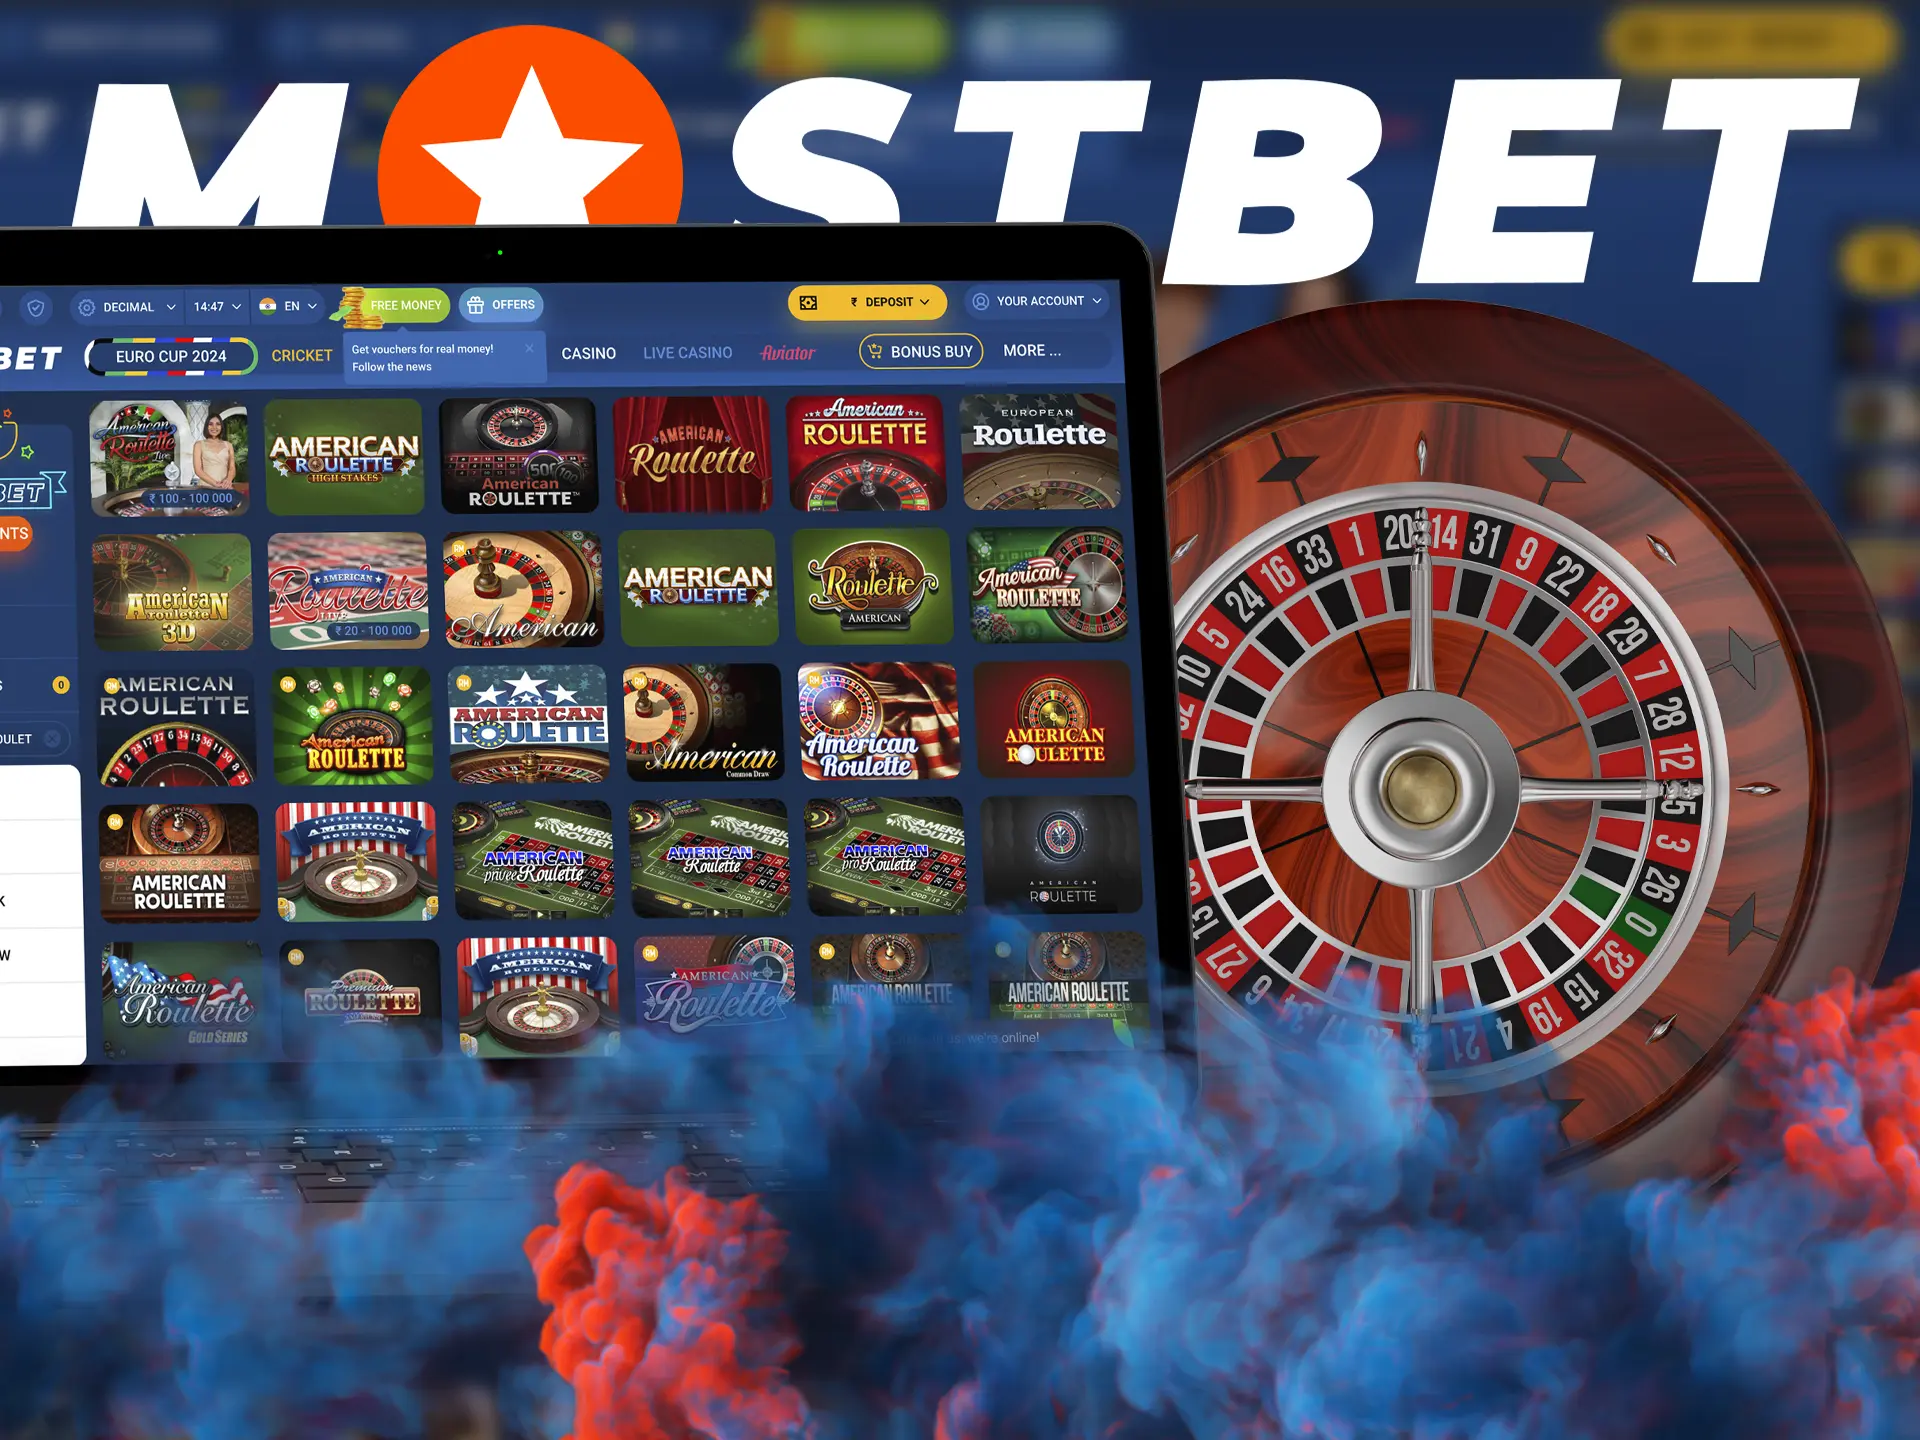 Try your luck at American Roulette from Mostbet Casino.